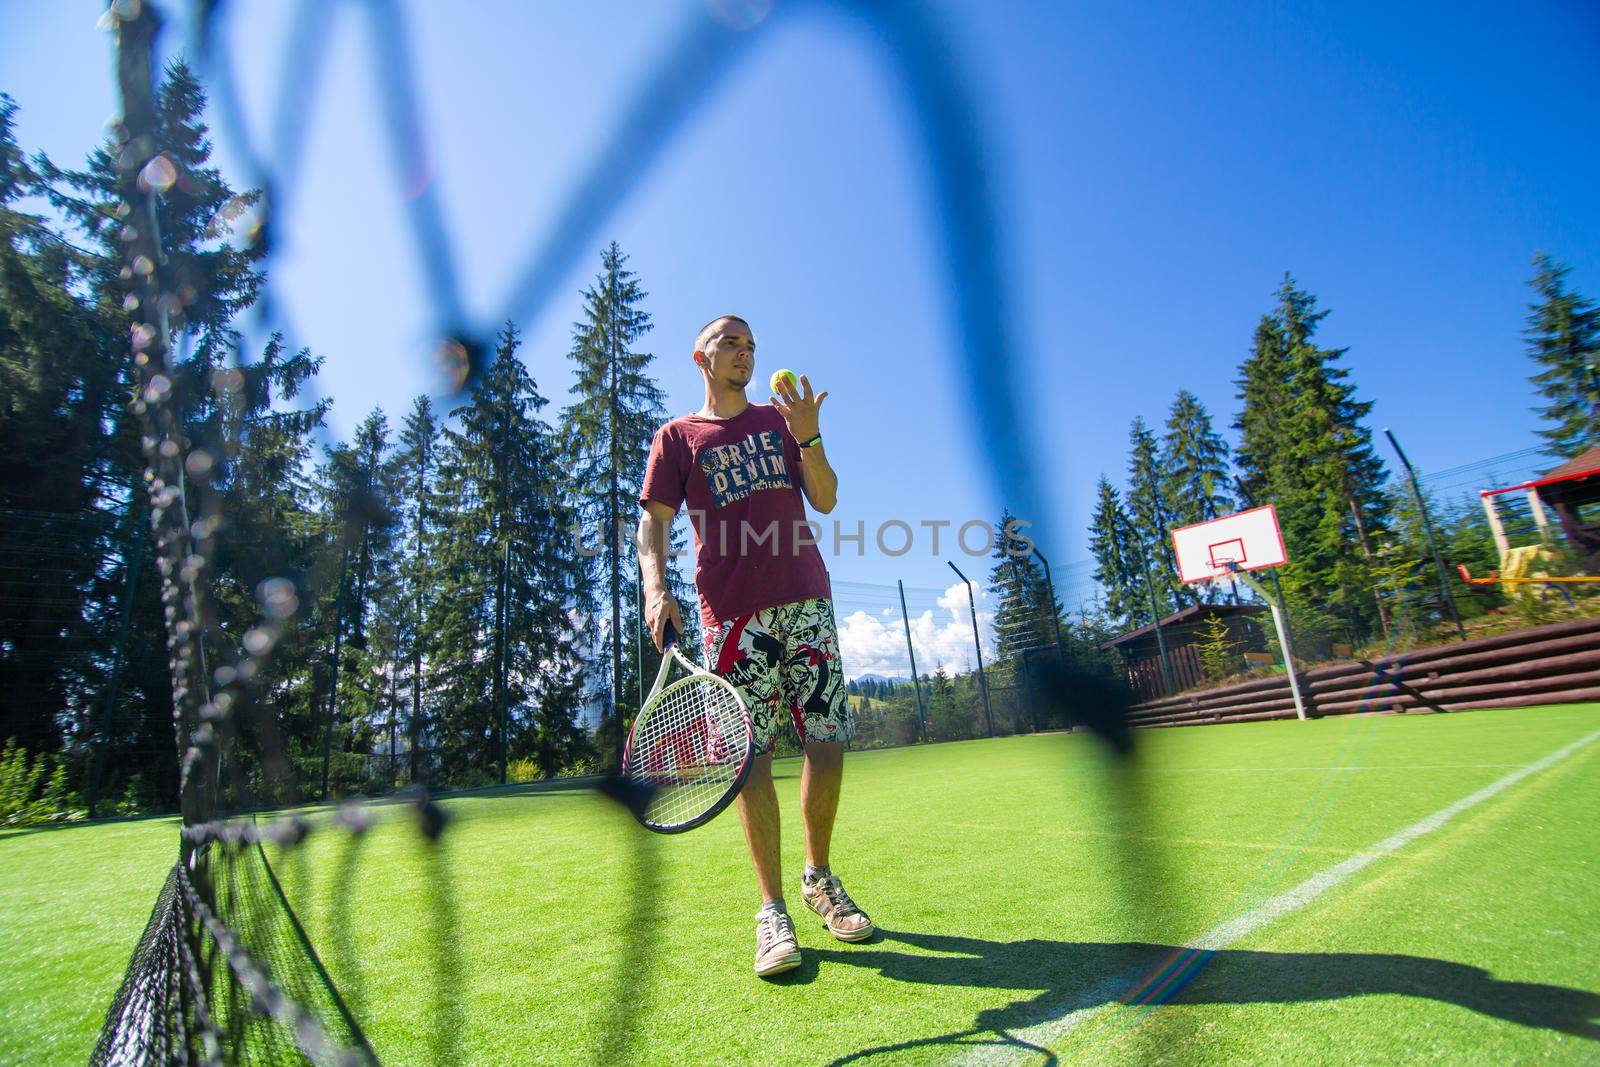 Guy plays in tennis on court in bright summer day.